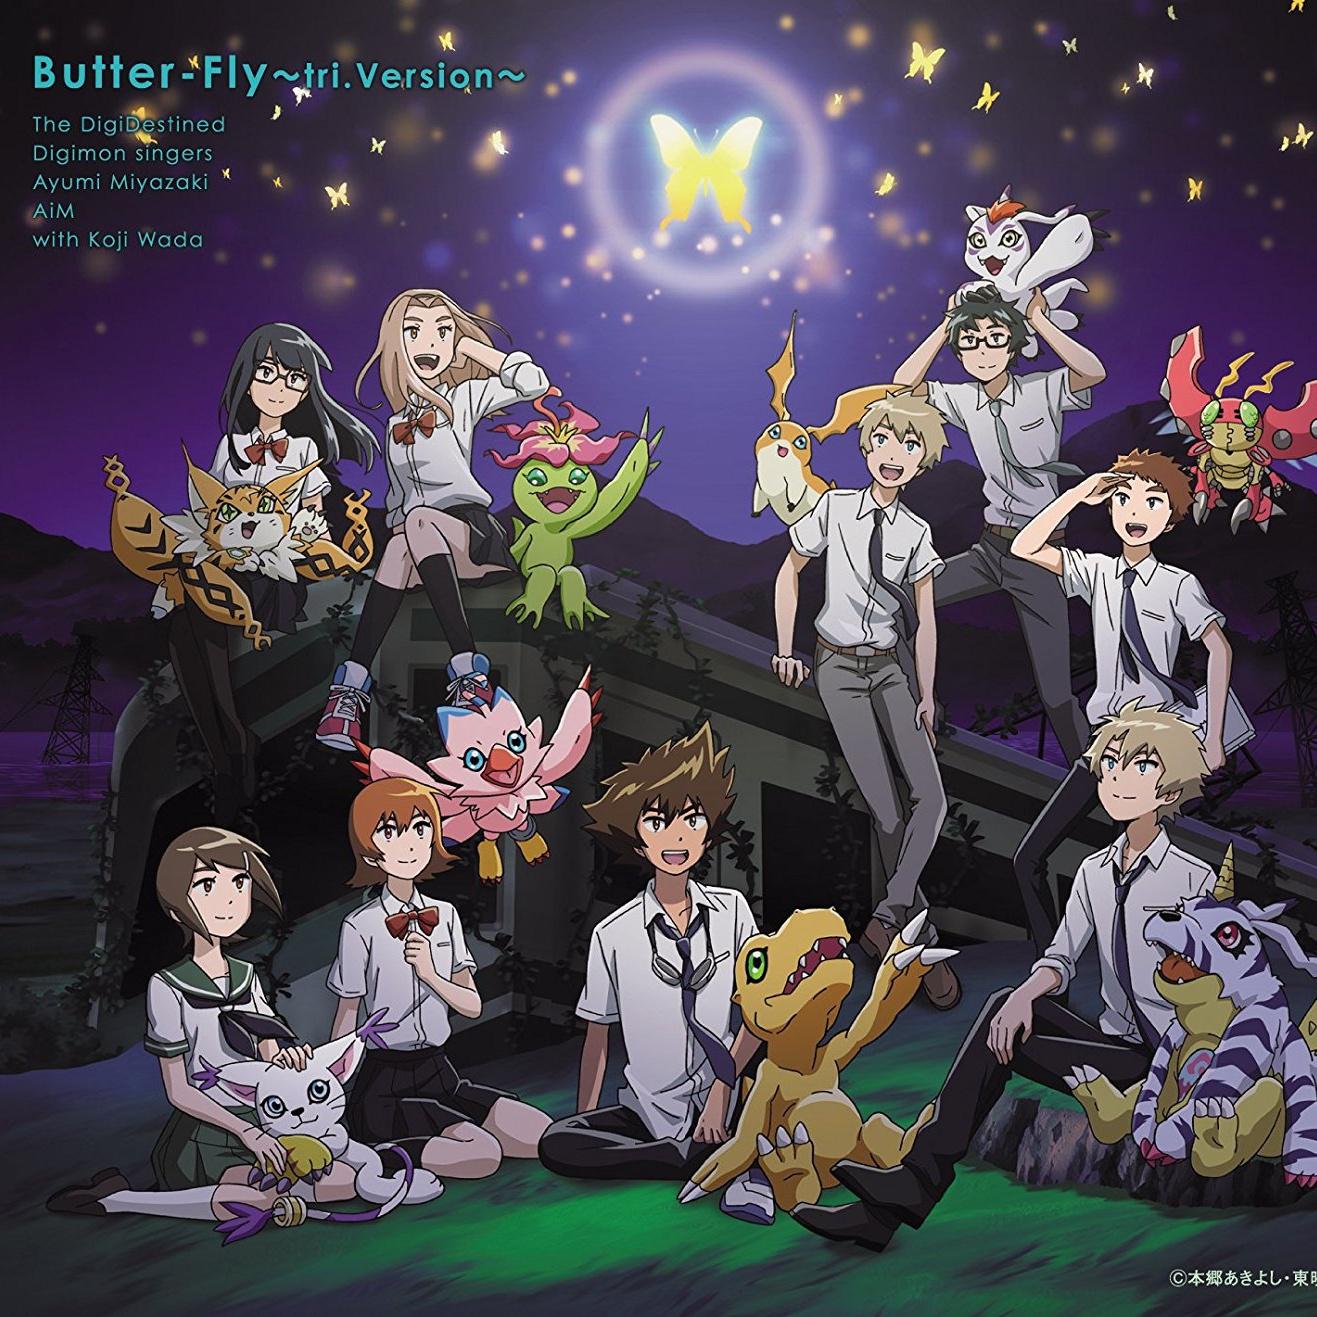 Butter-Fly~tri.Version~